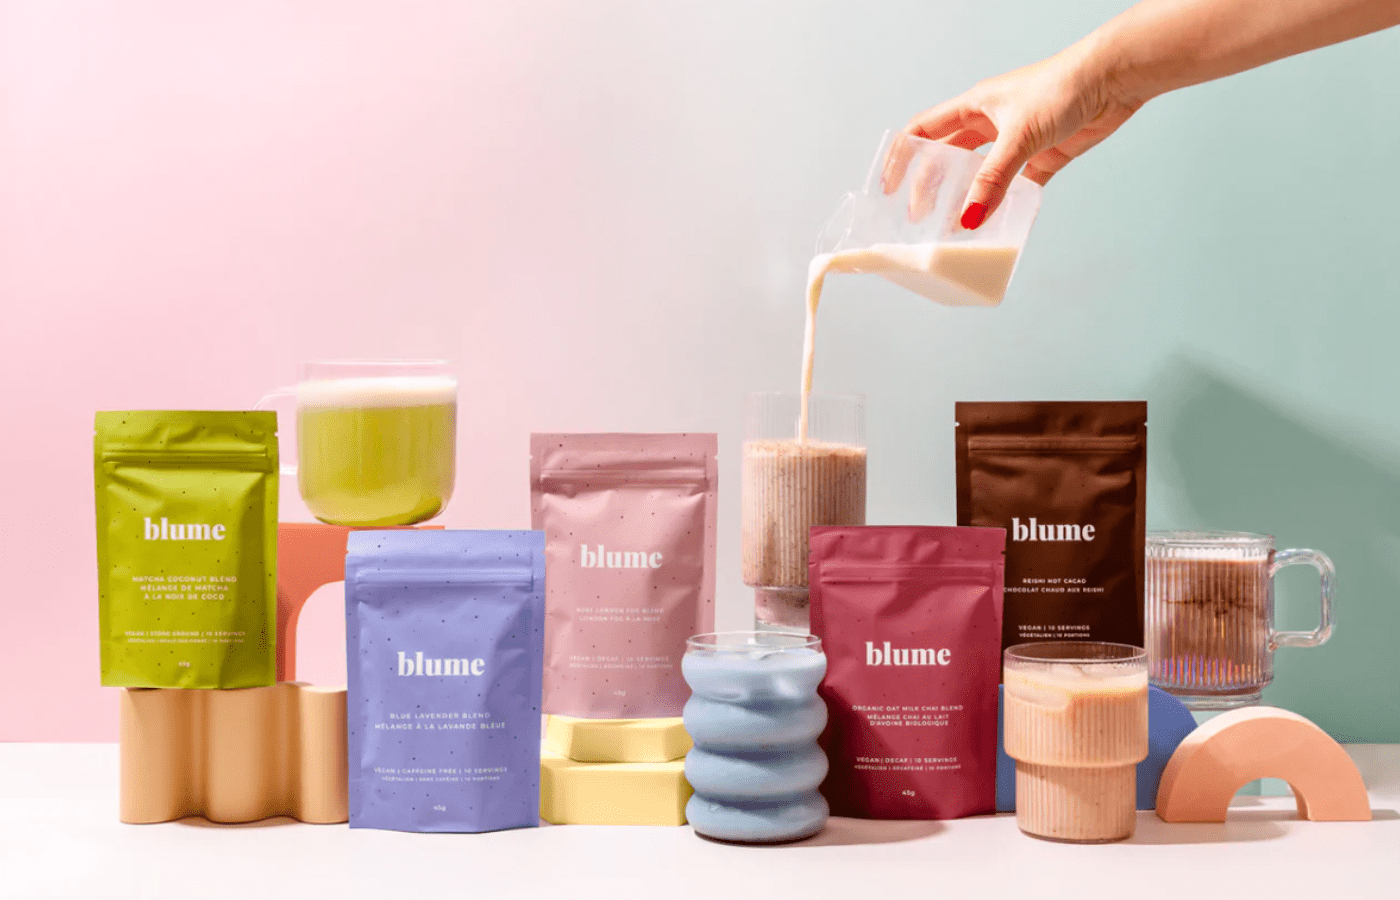 Blume product